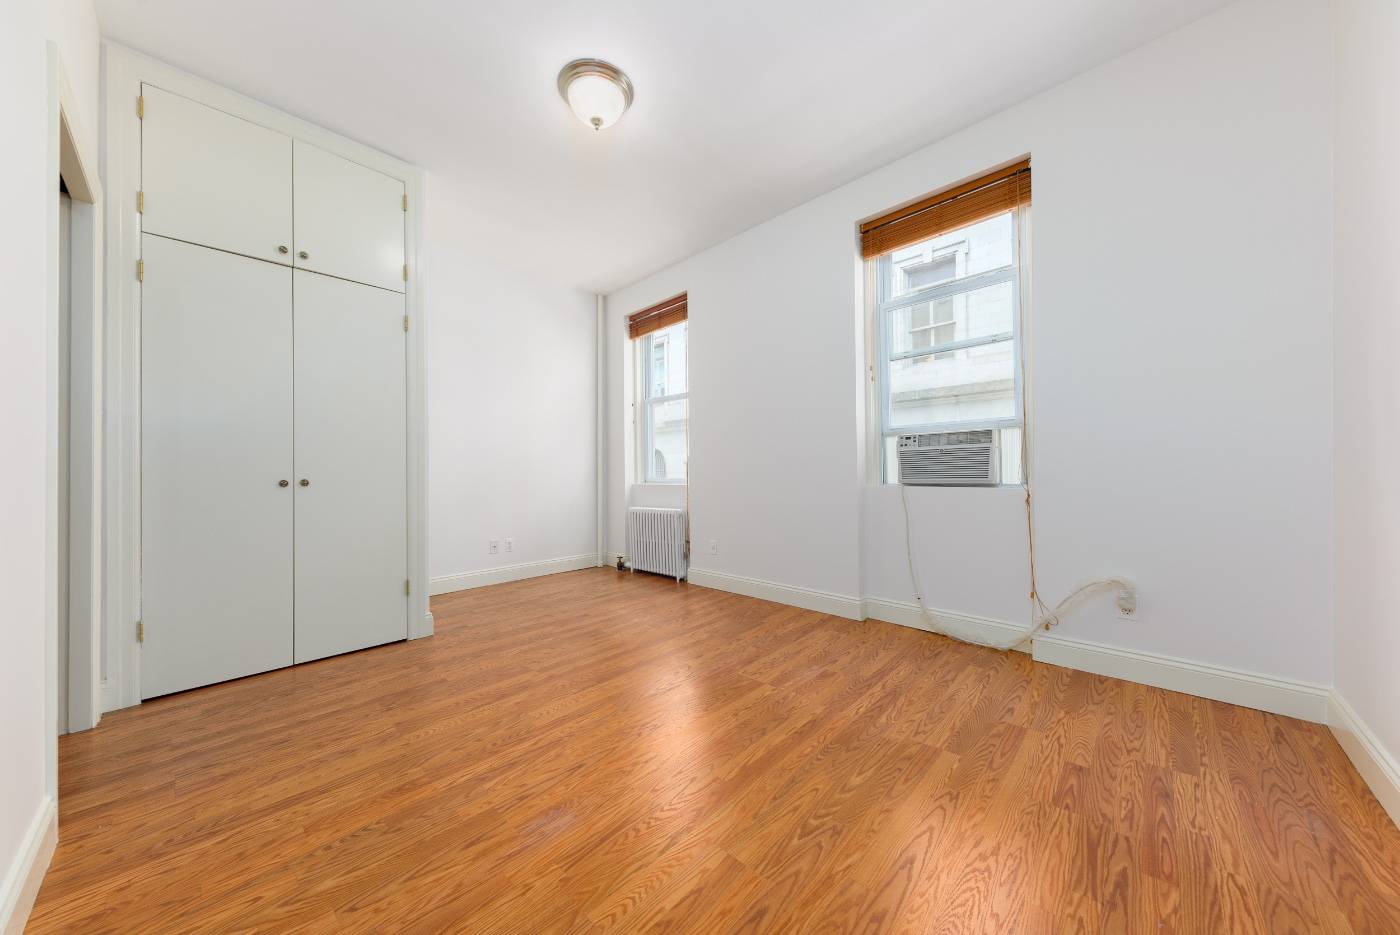 Sun Filled newly renovated full floor prime Nolita prewar 1 bedroom with a WINDOWED CHEFS KITCHEN, giant terrace, high ceilings, and a very large master bedroom.